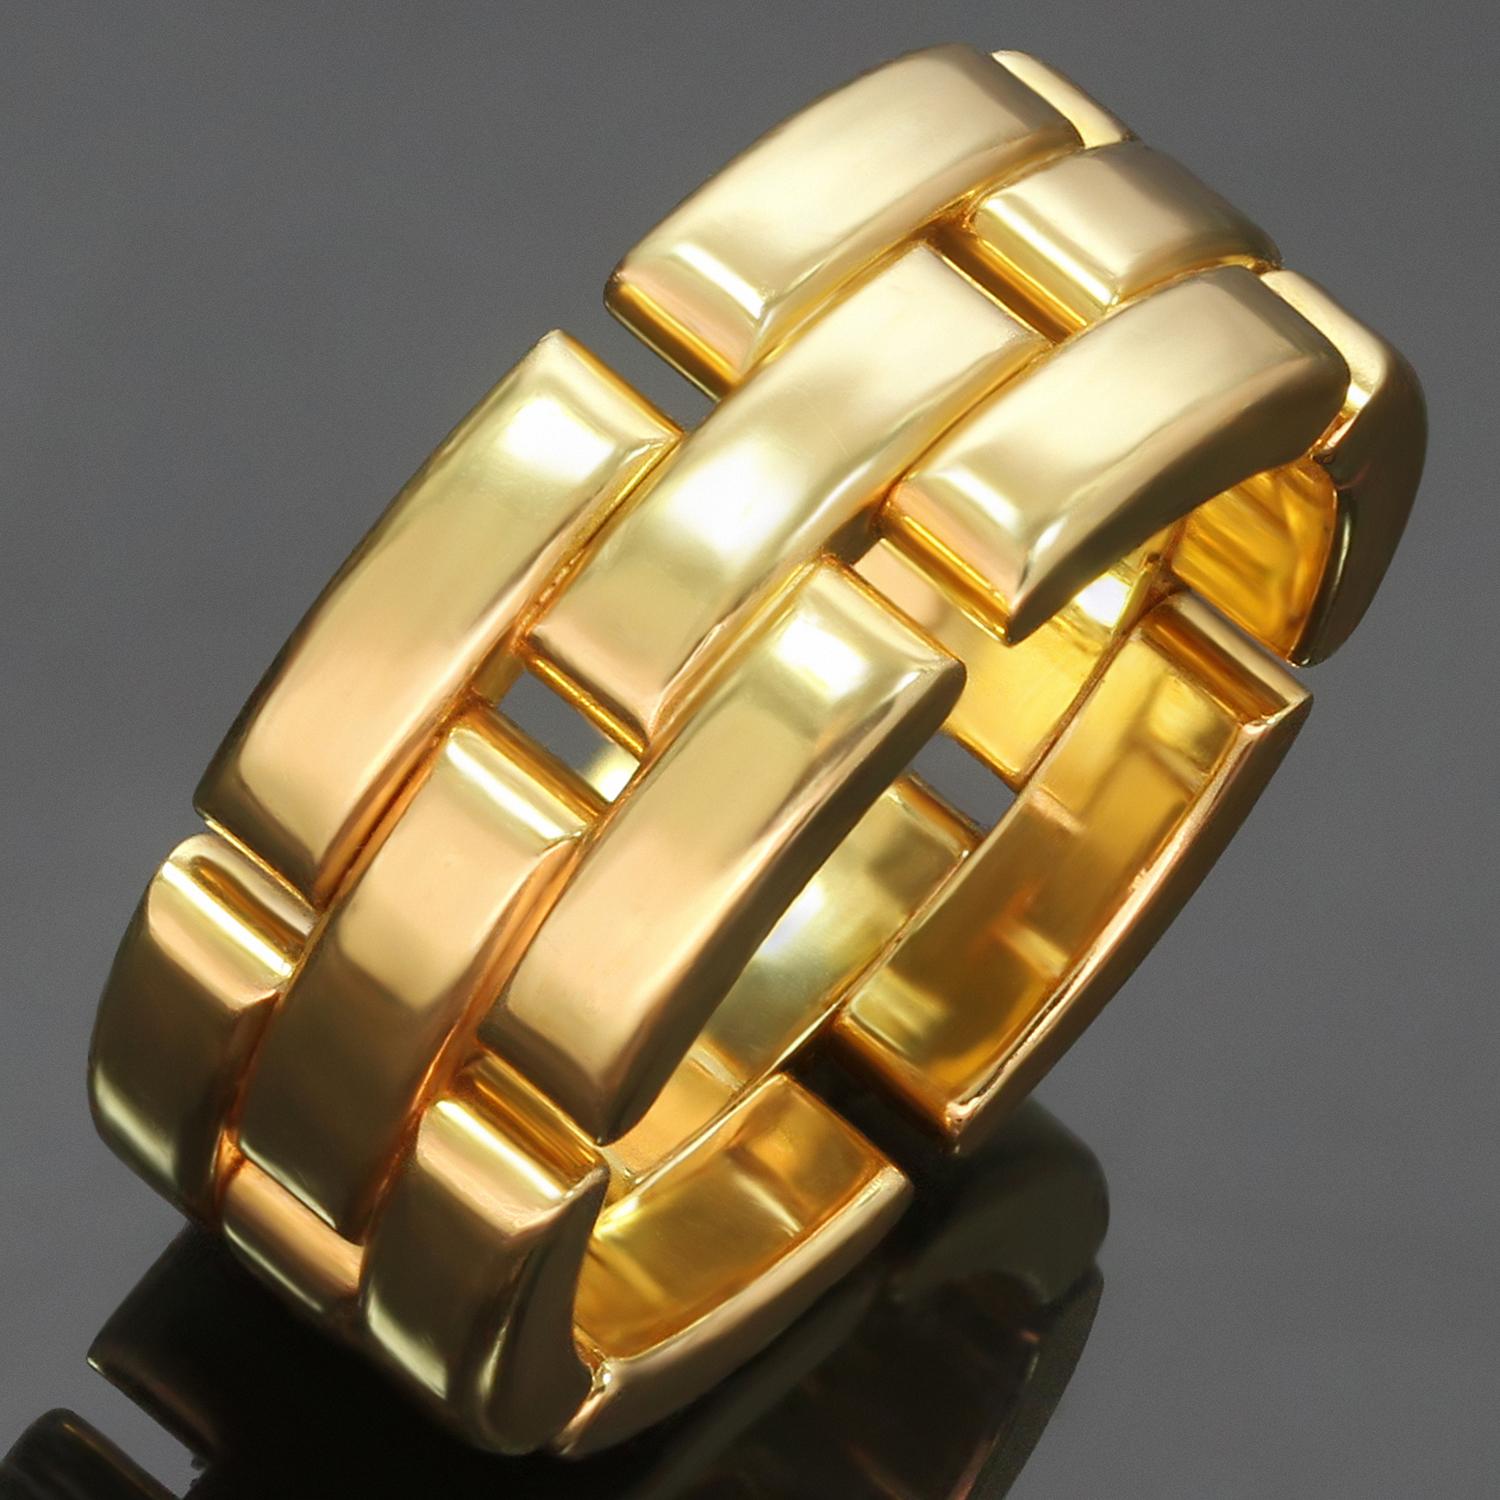 This authentic Cartier band is made in solid 18k yellow gold and features an emblematic design for every day elegance. Measurements: 0.31